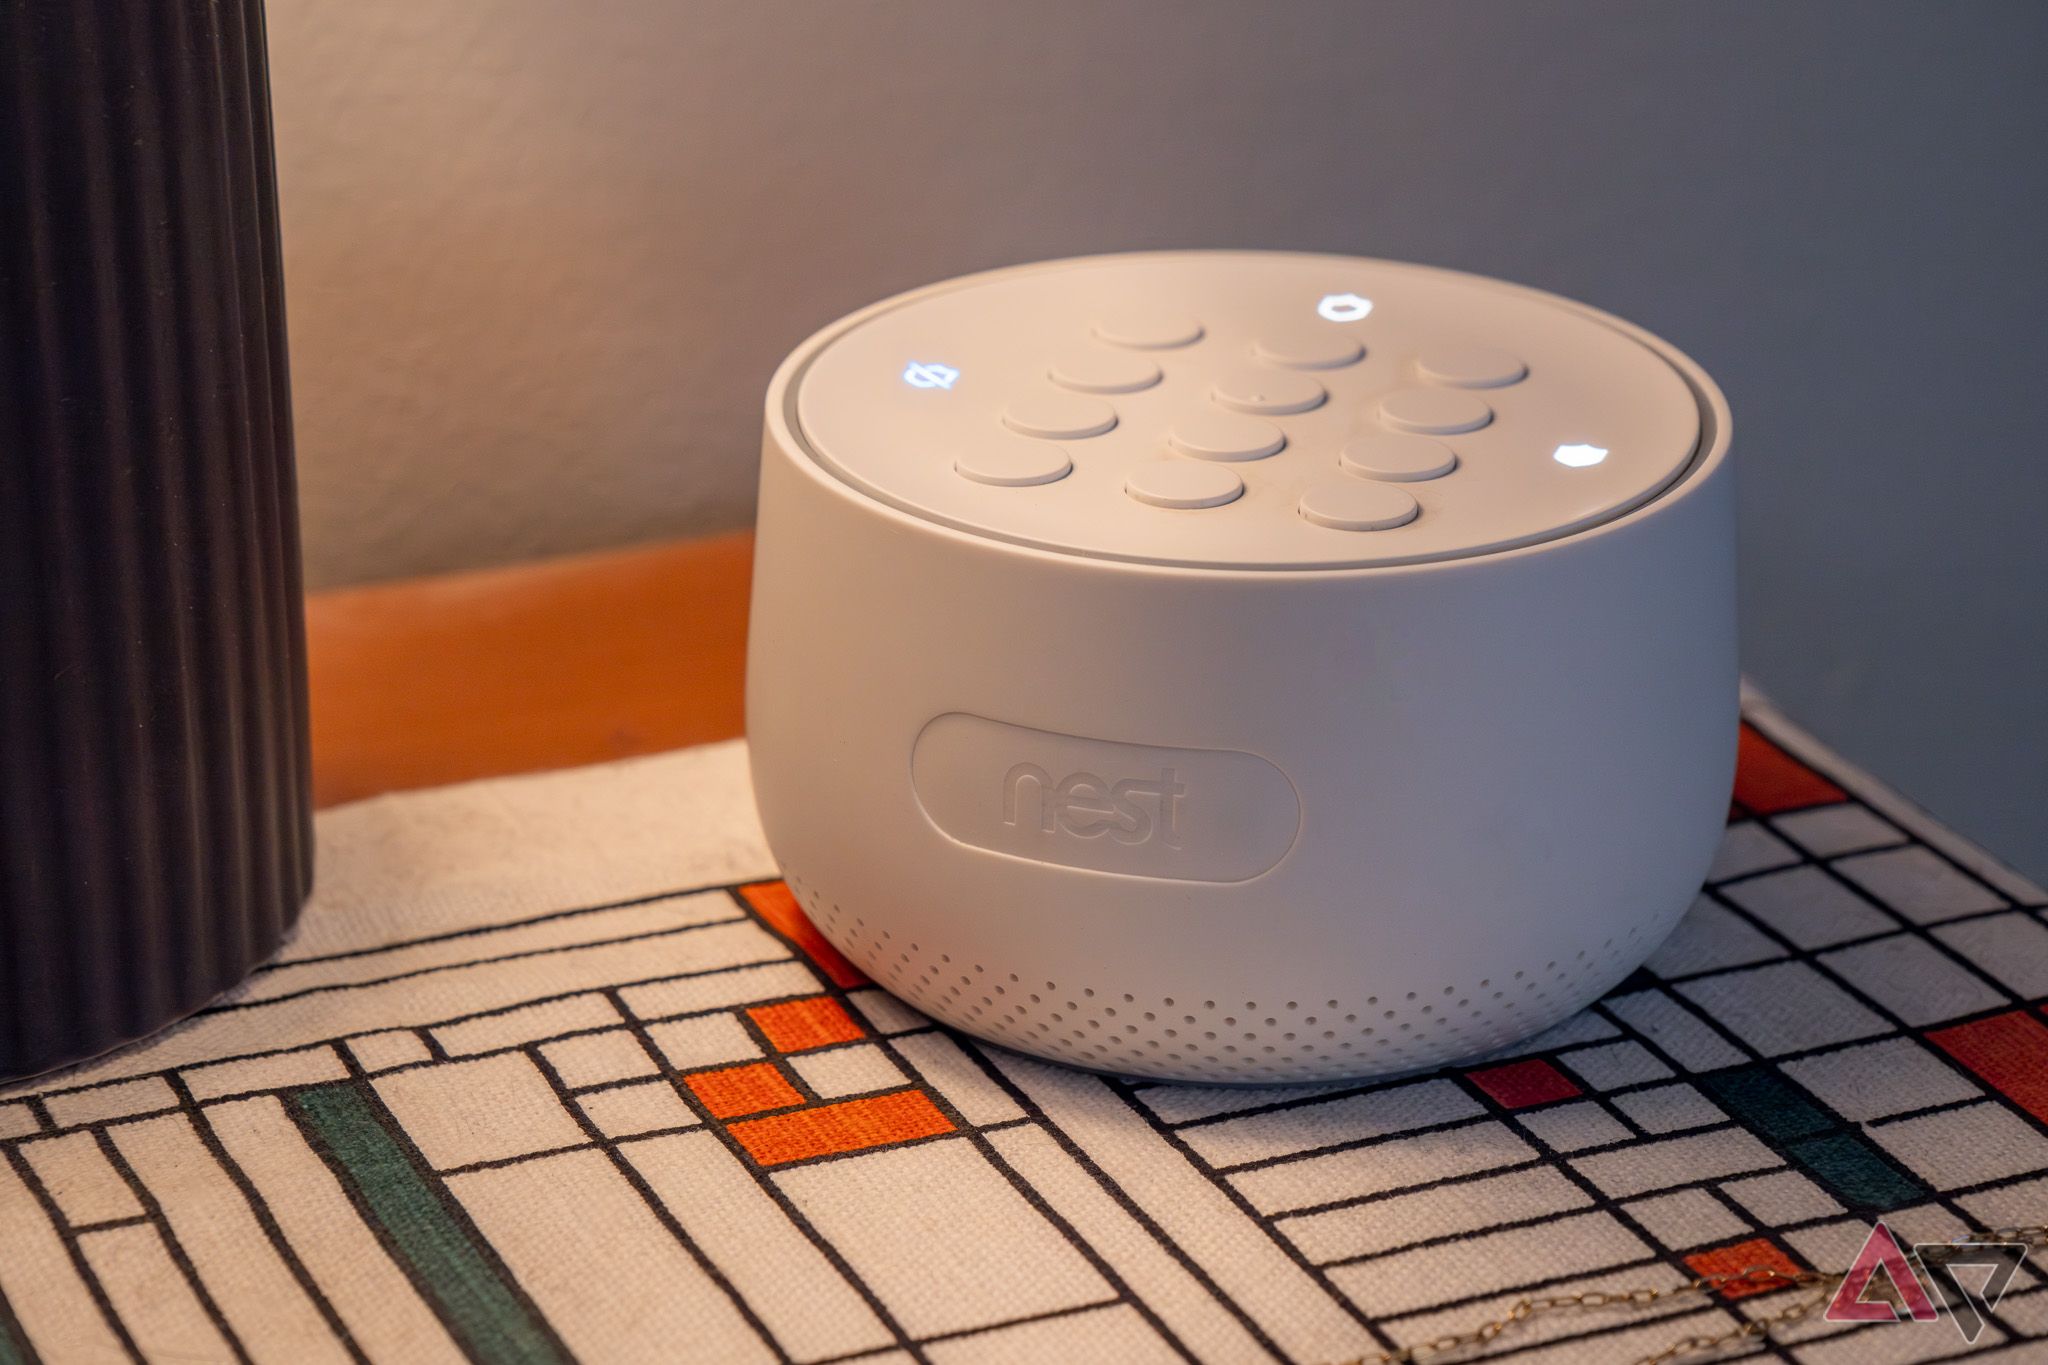 Google Nest’s Reddit AMA did not impress because the service is a multitude